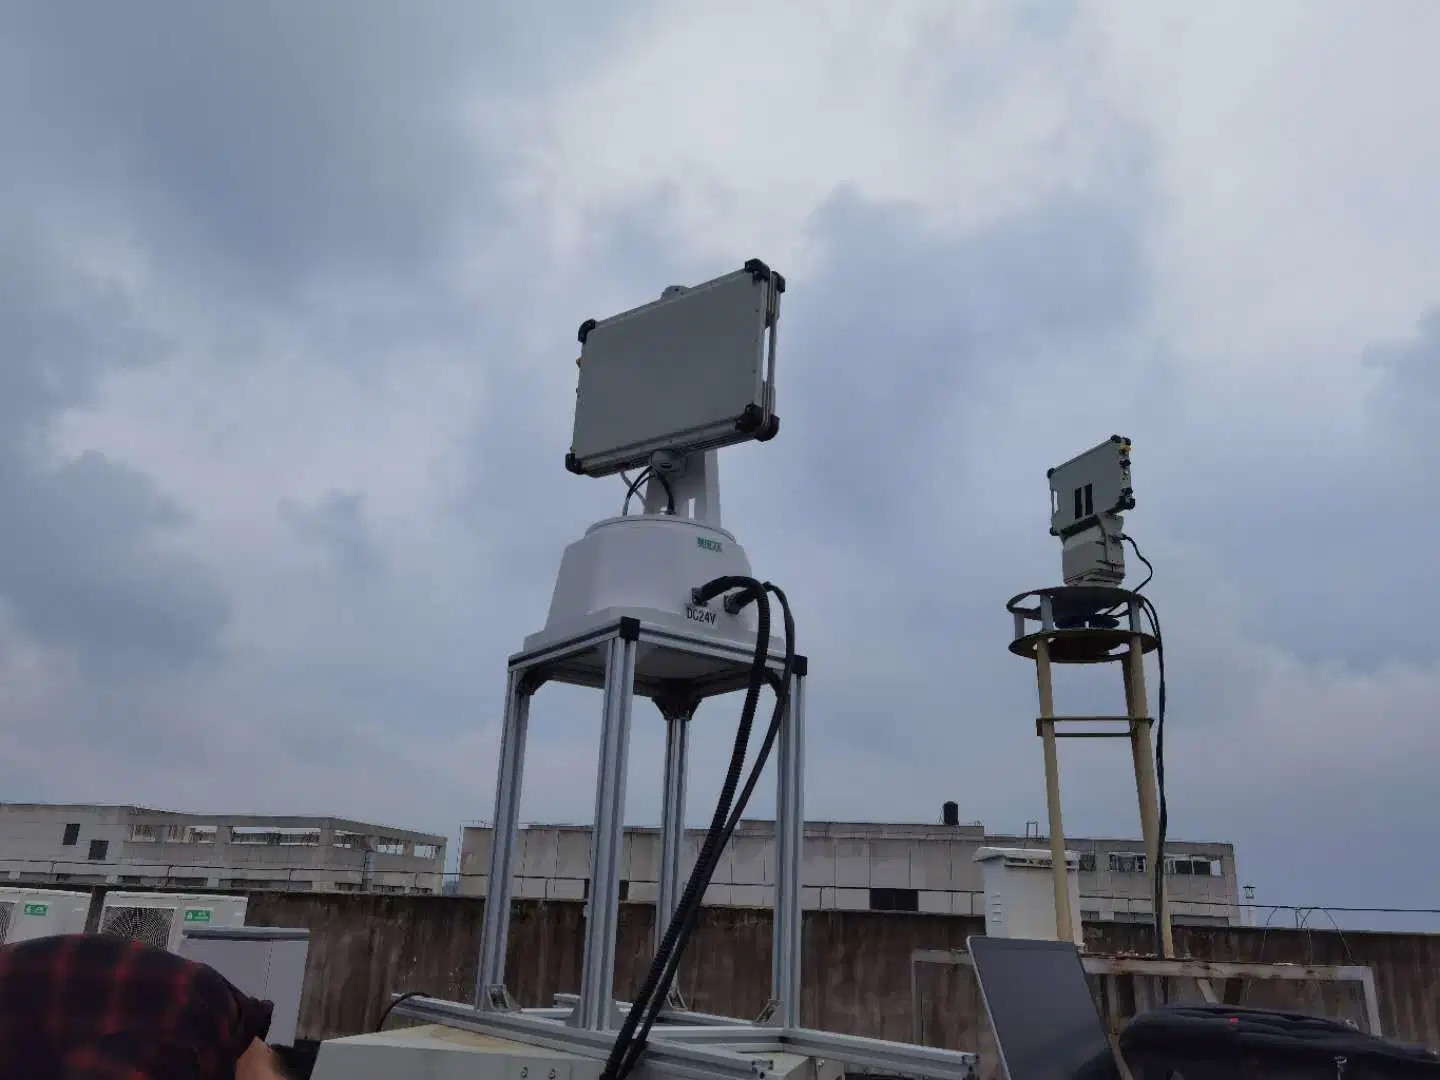 Data Center Perimeter Security Radar to Detect Intruders and Alert Security Personnel